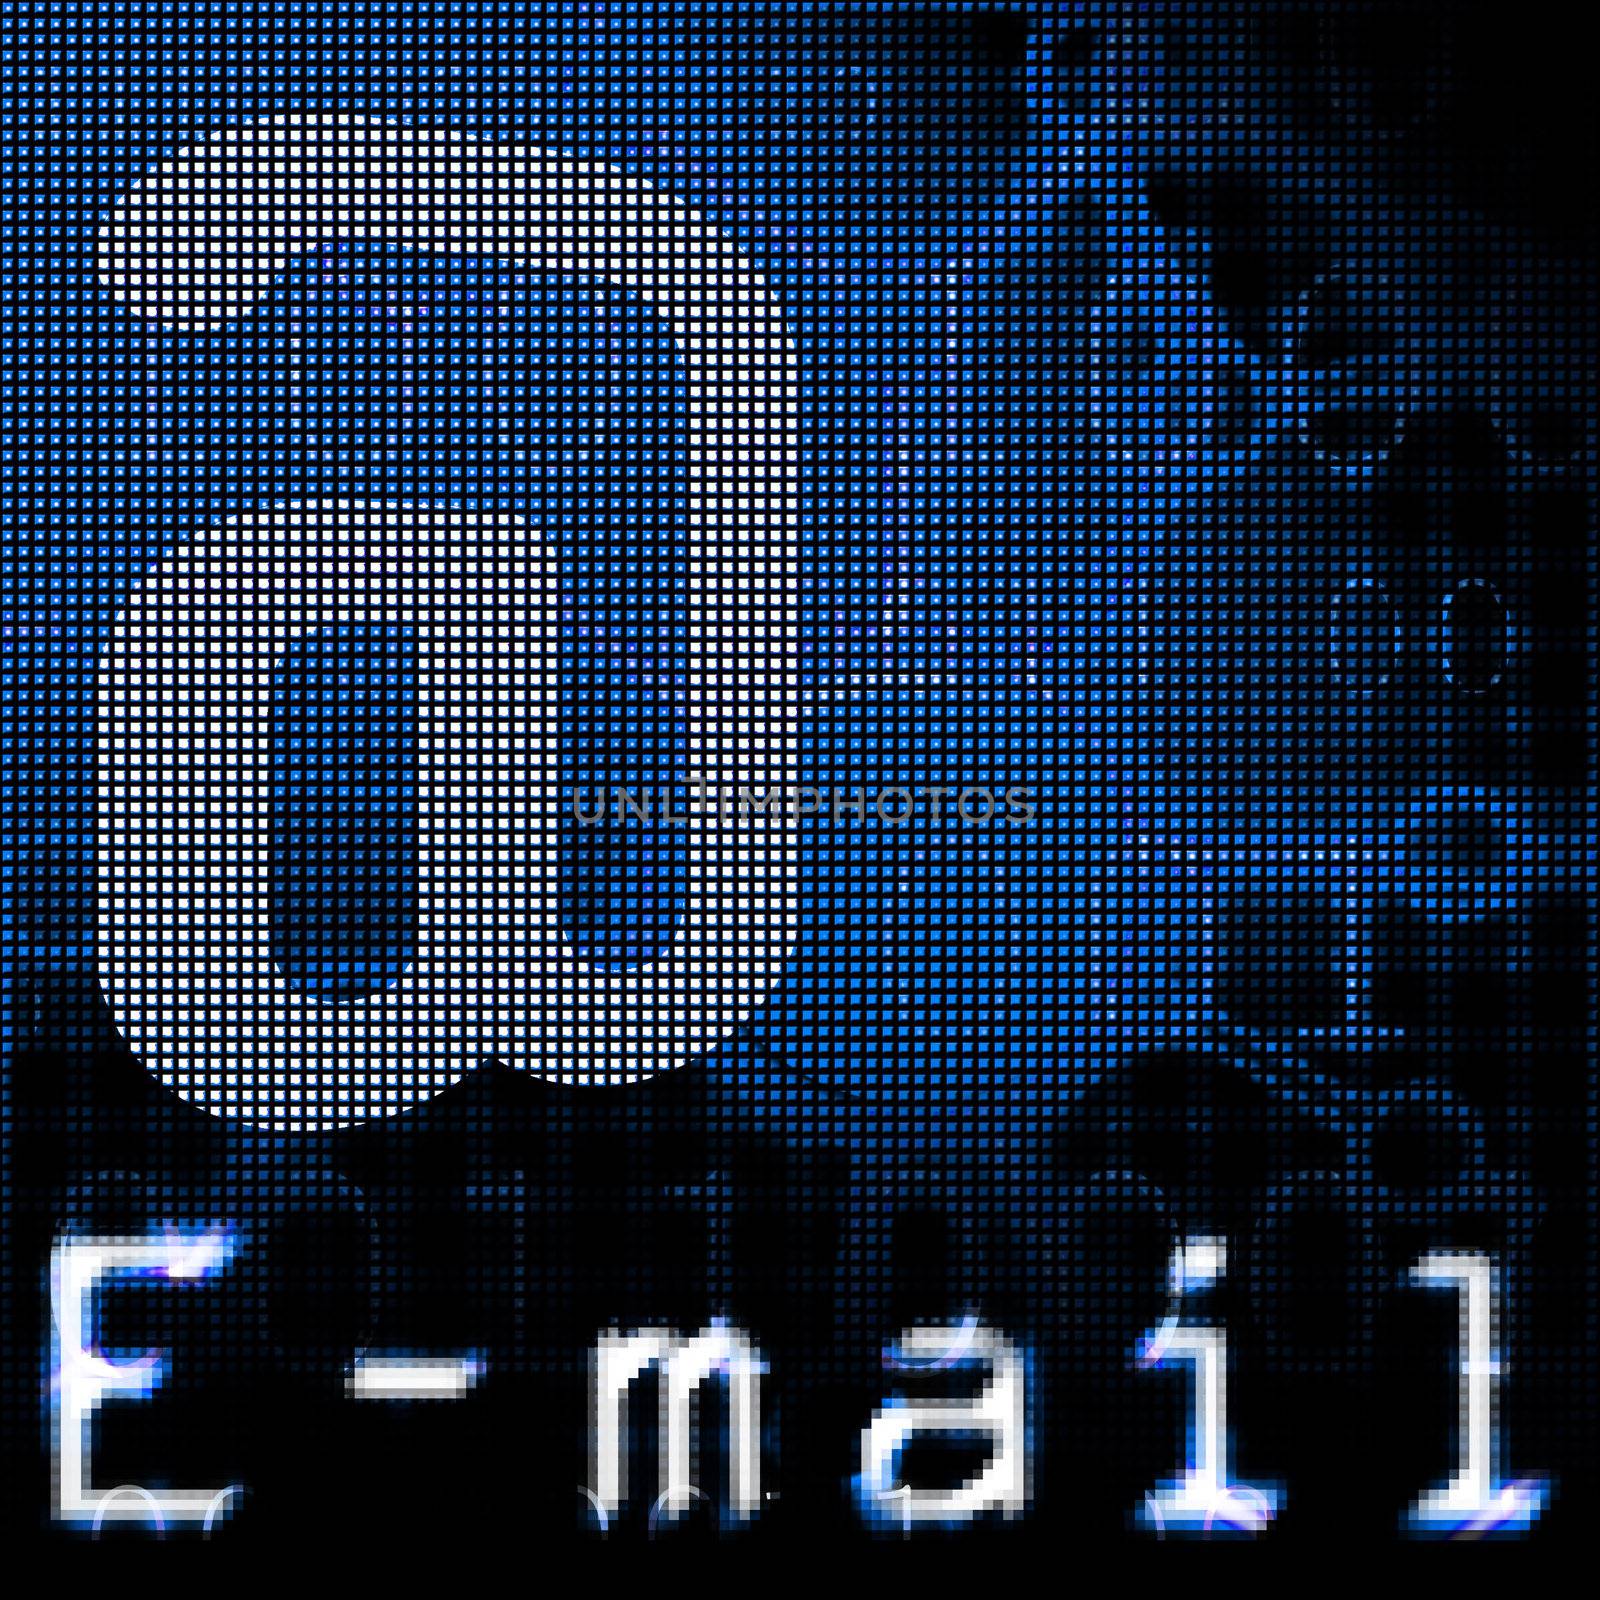 abstract e-mail